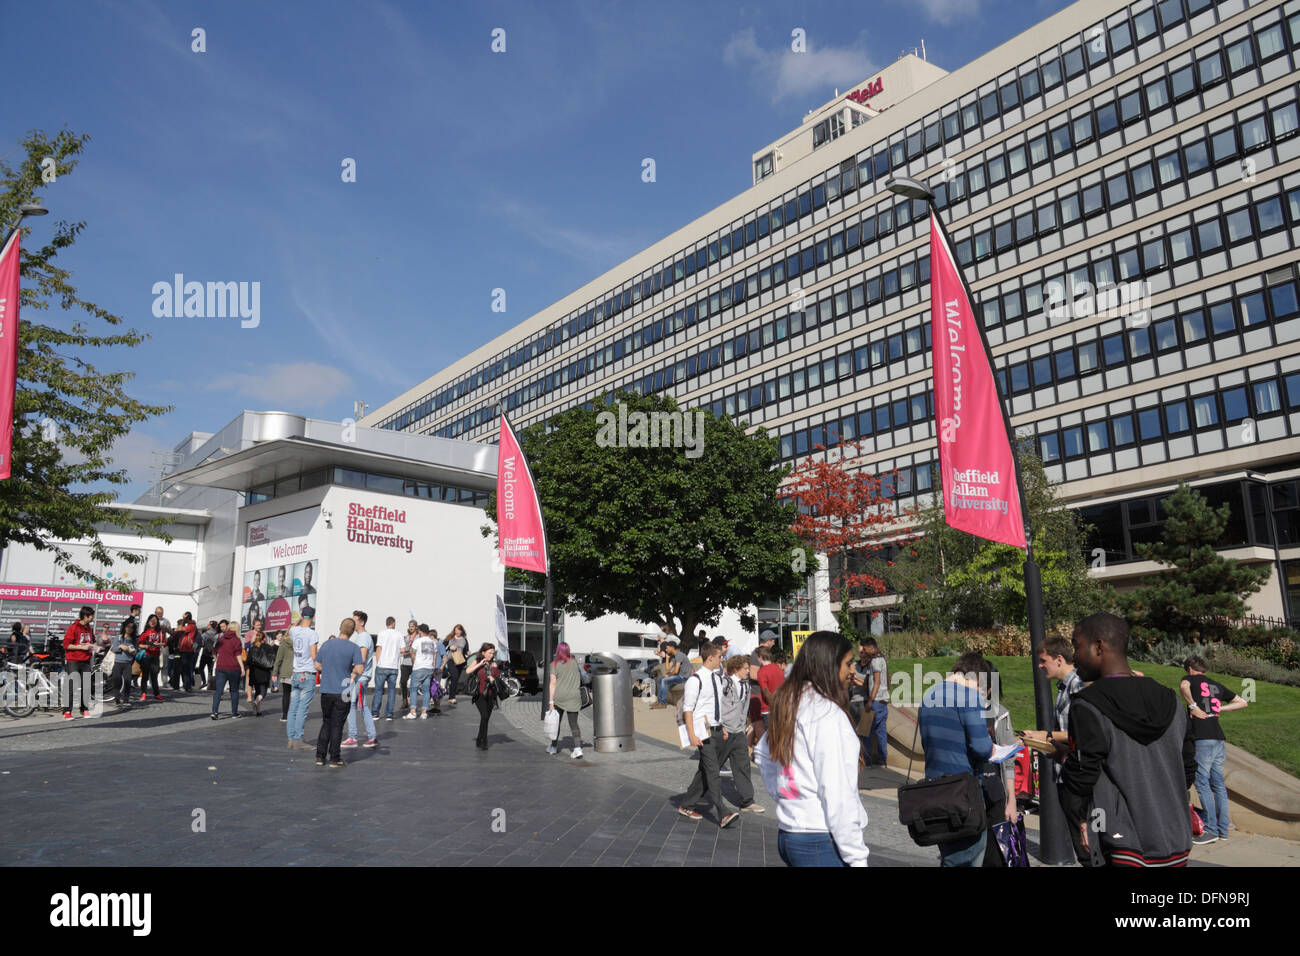 People Students standing outside the entrance of Sheffield Hallam university, Sheffield city centre England Stock Photo